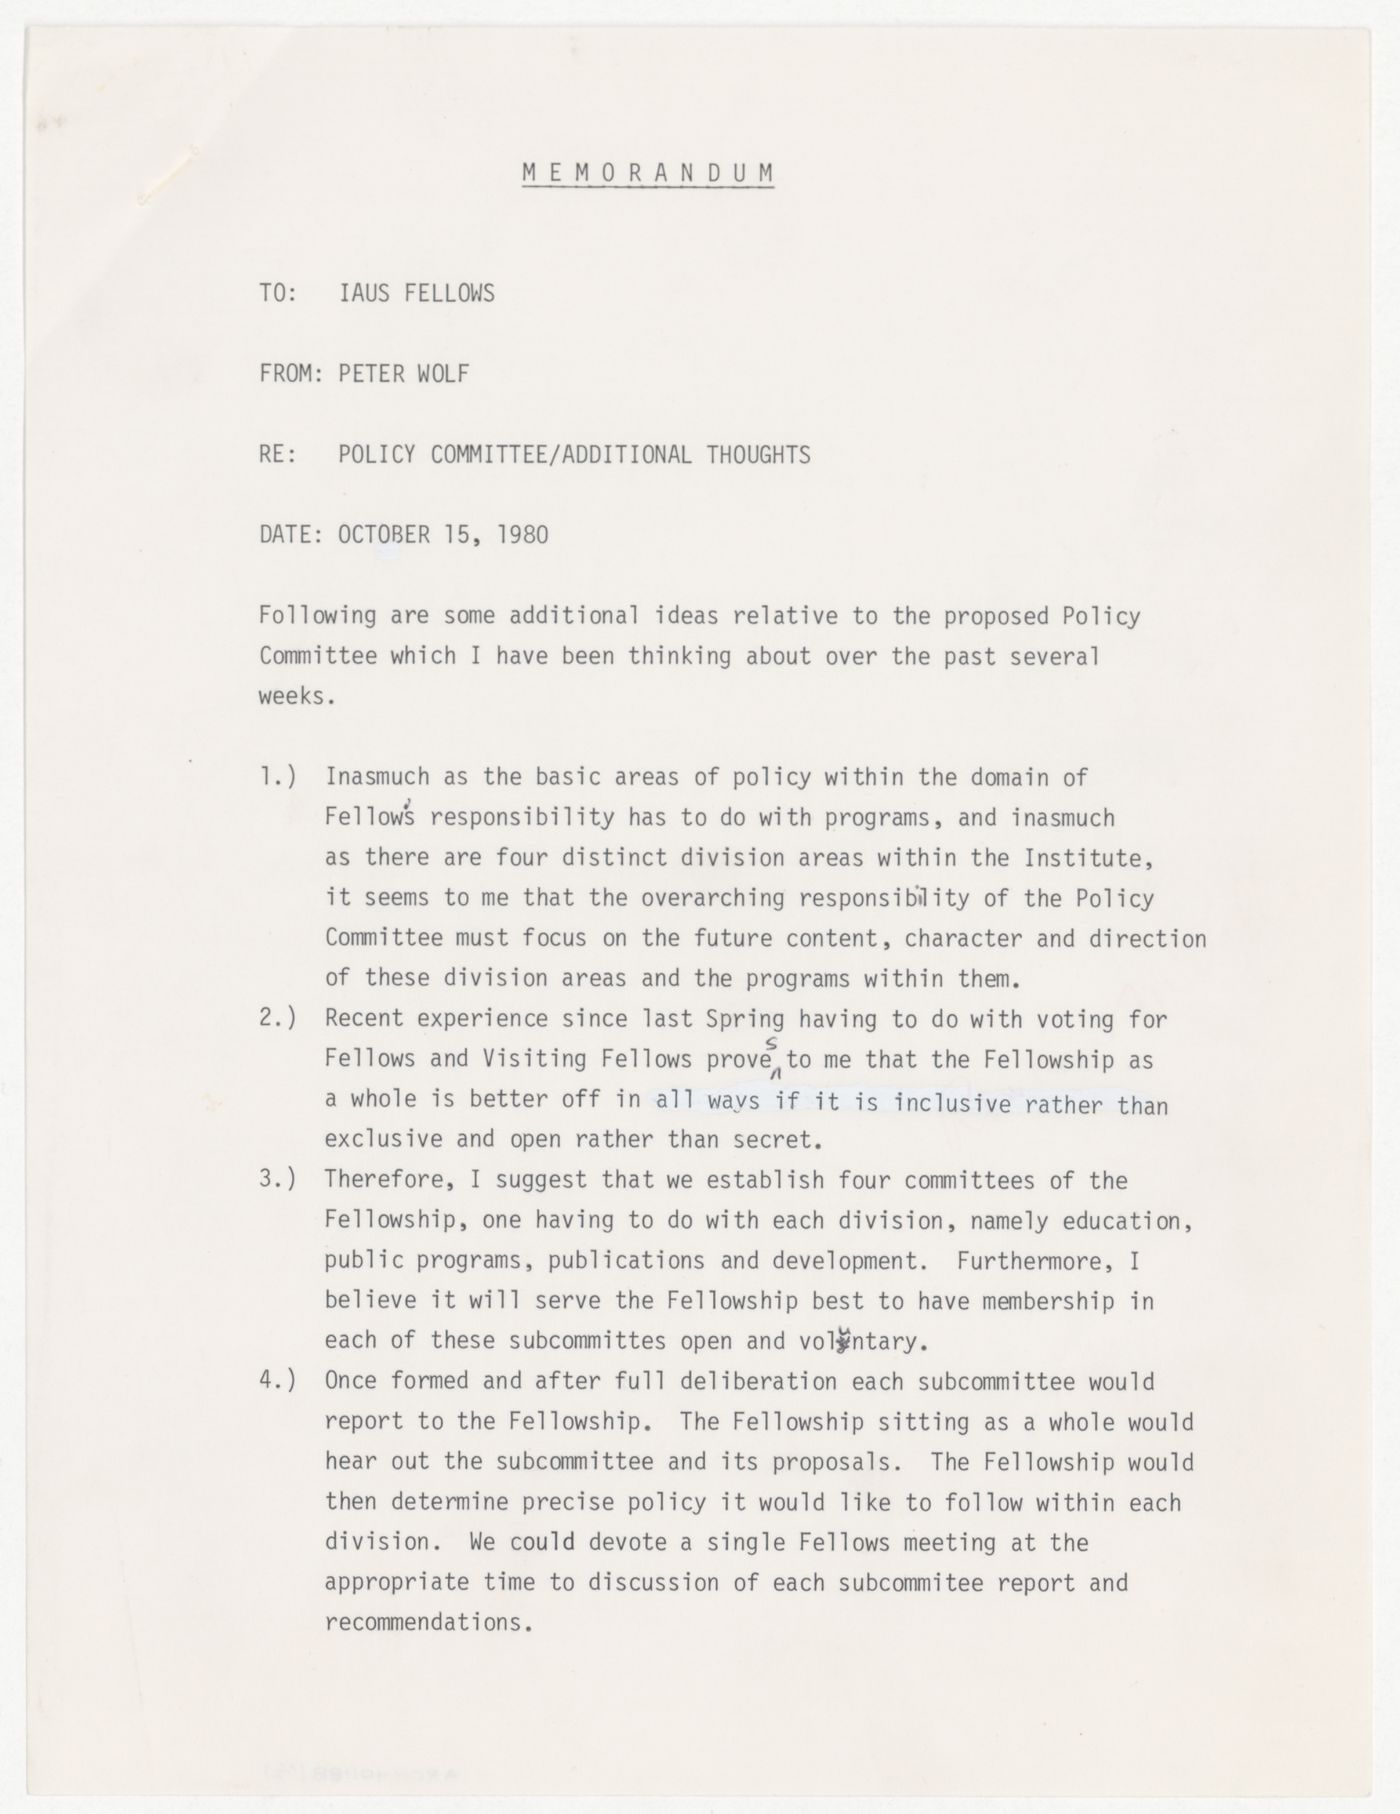 Memorandum from Peter Wolf to the Fellows about proposed policy committee